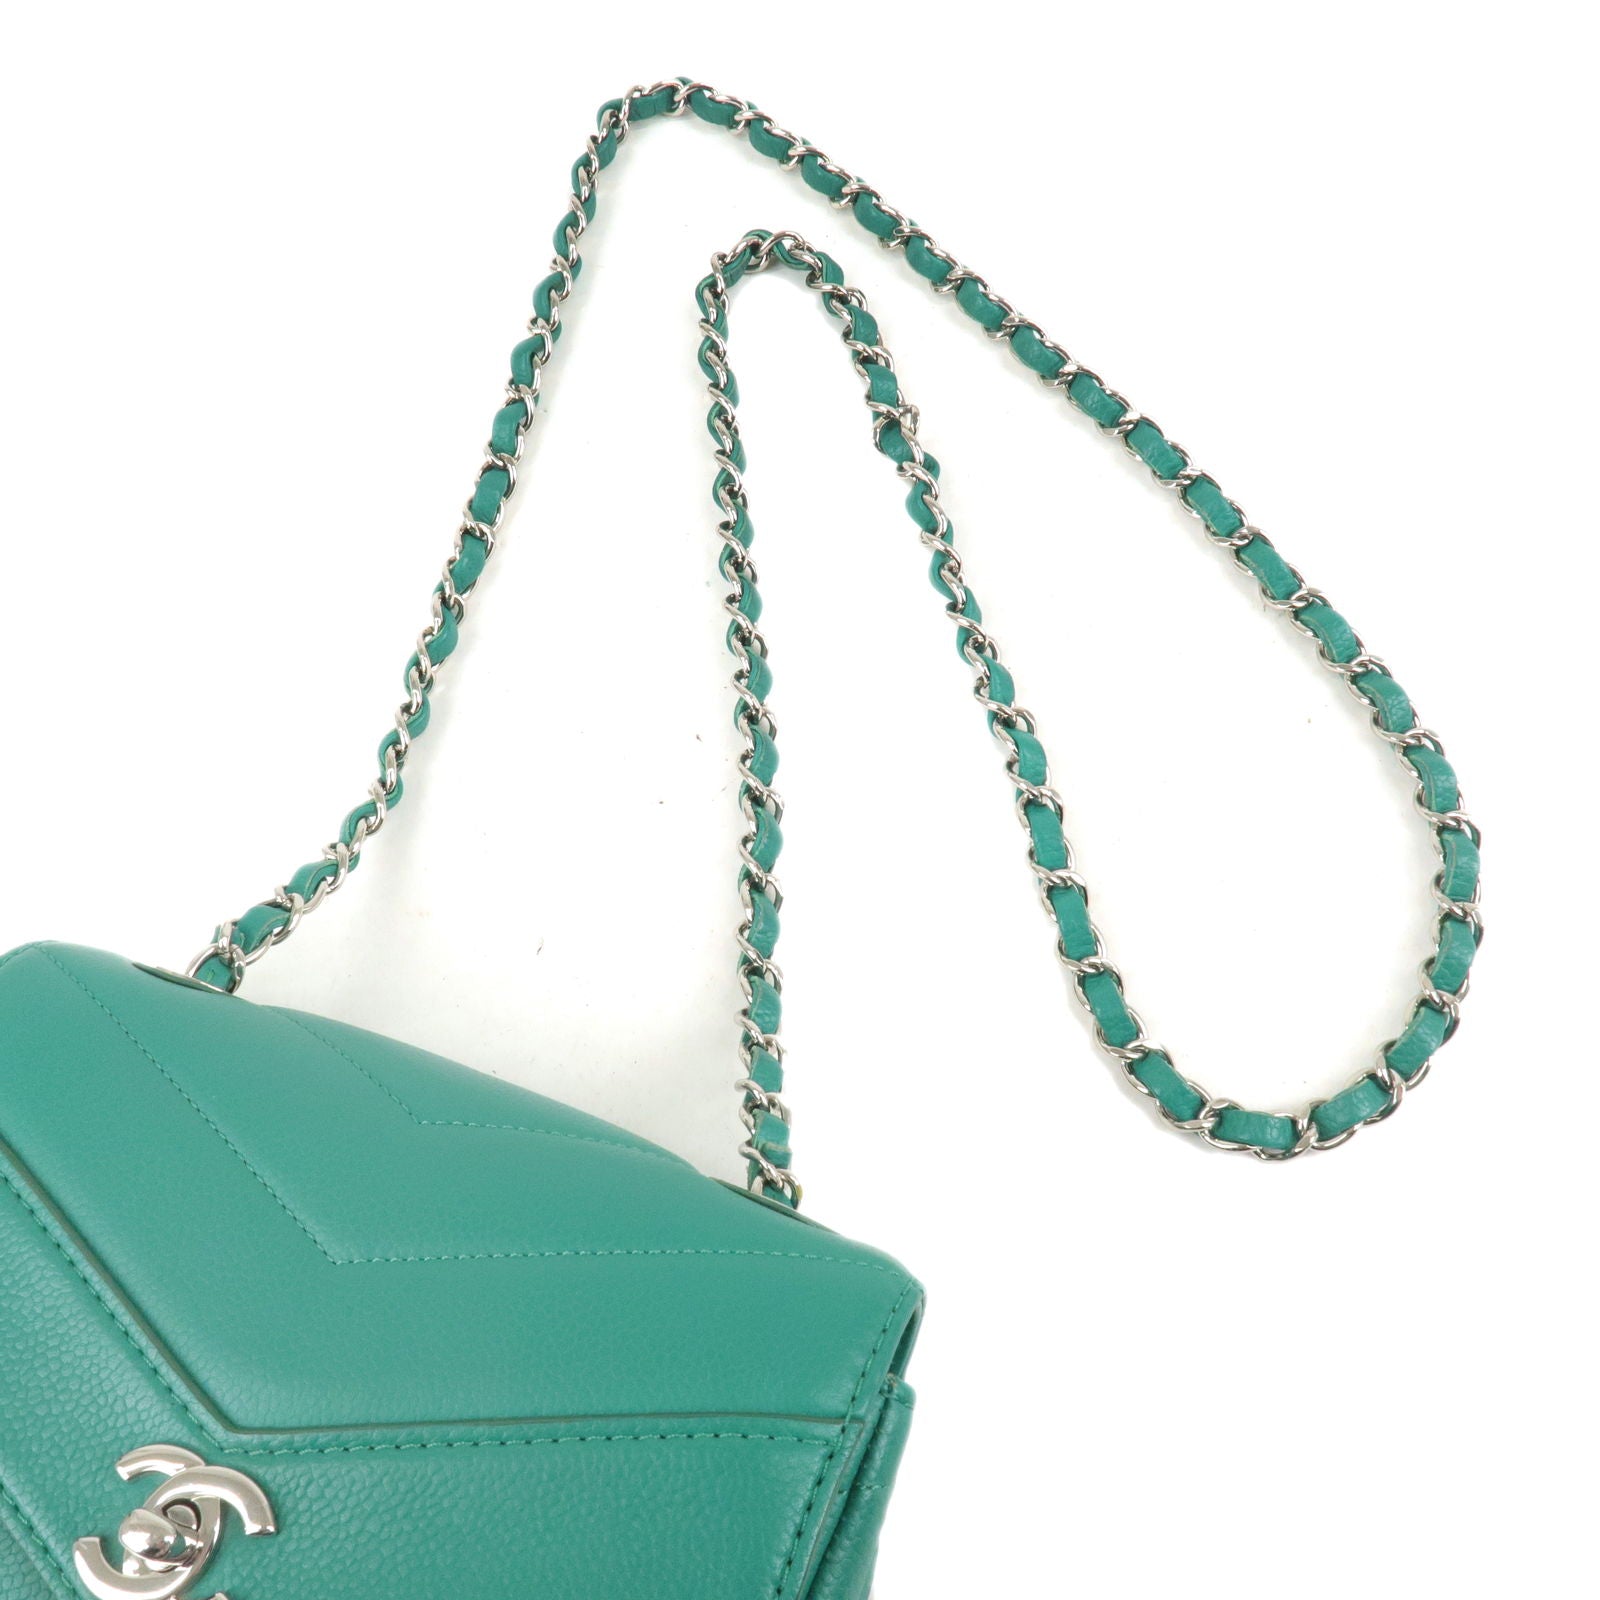 Skin - Shoulder - CHANEL - Flap - Chain - Bag - Chanel Pre-Owned 2006  bouclé skirt suit - Green – CHANEL Face Skincare - V - Stitch - Caviar